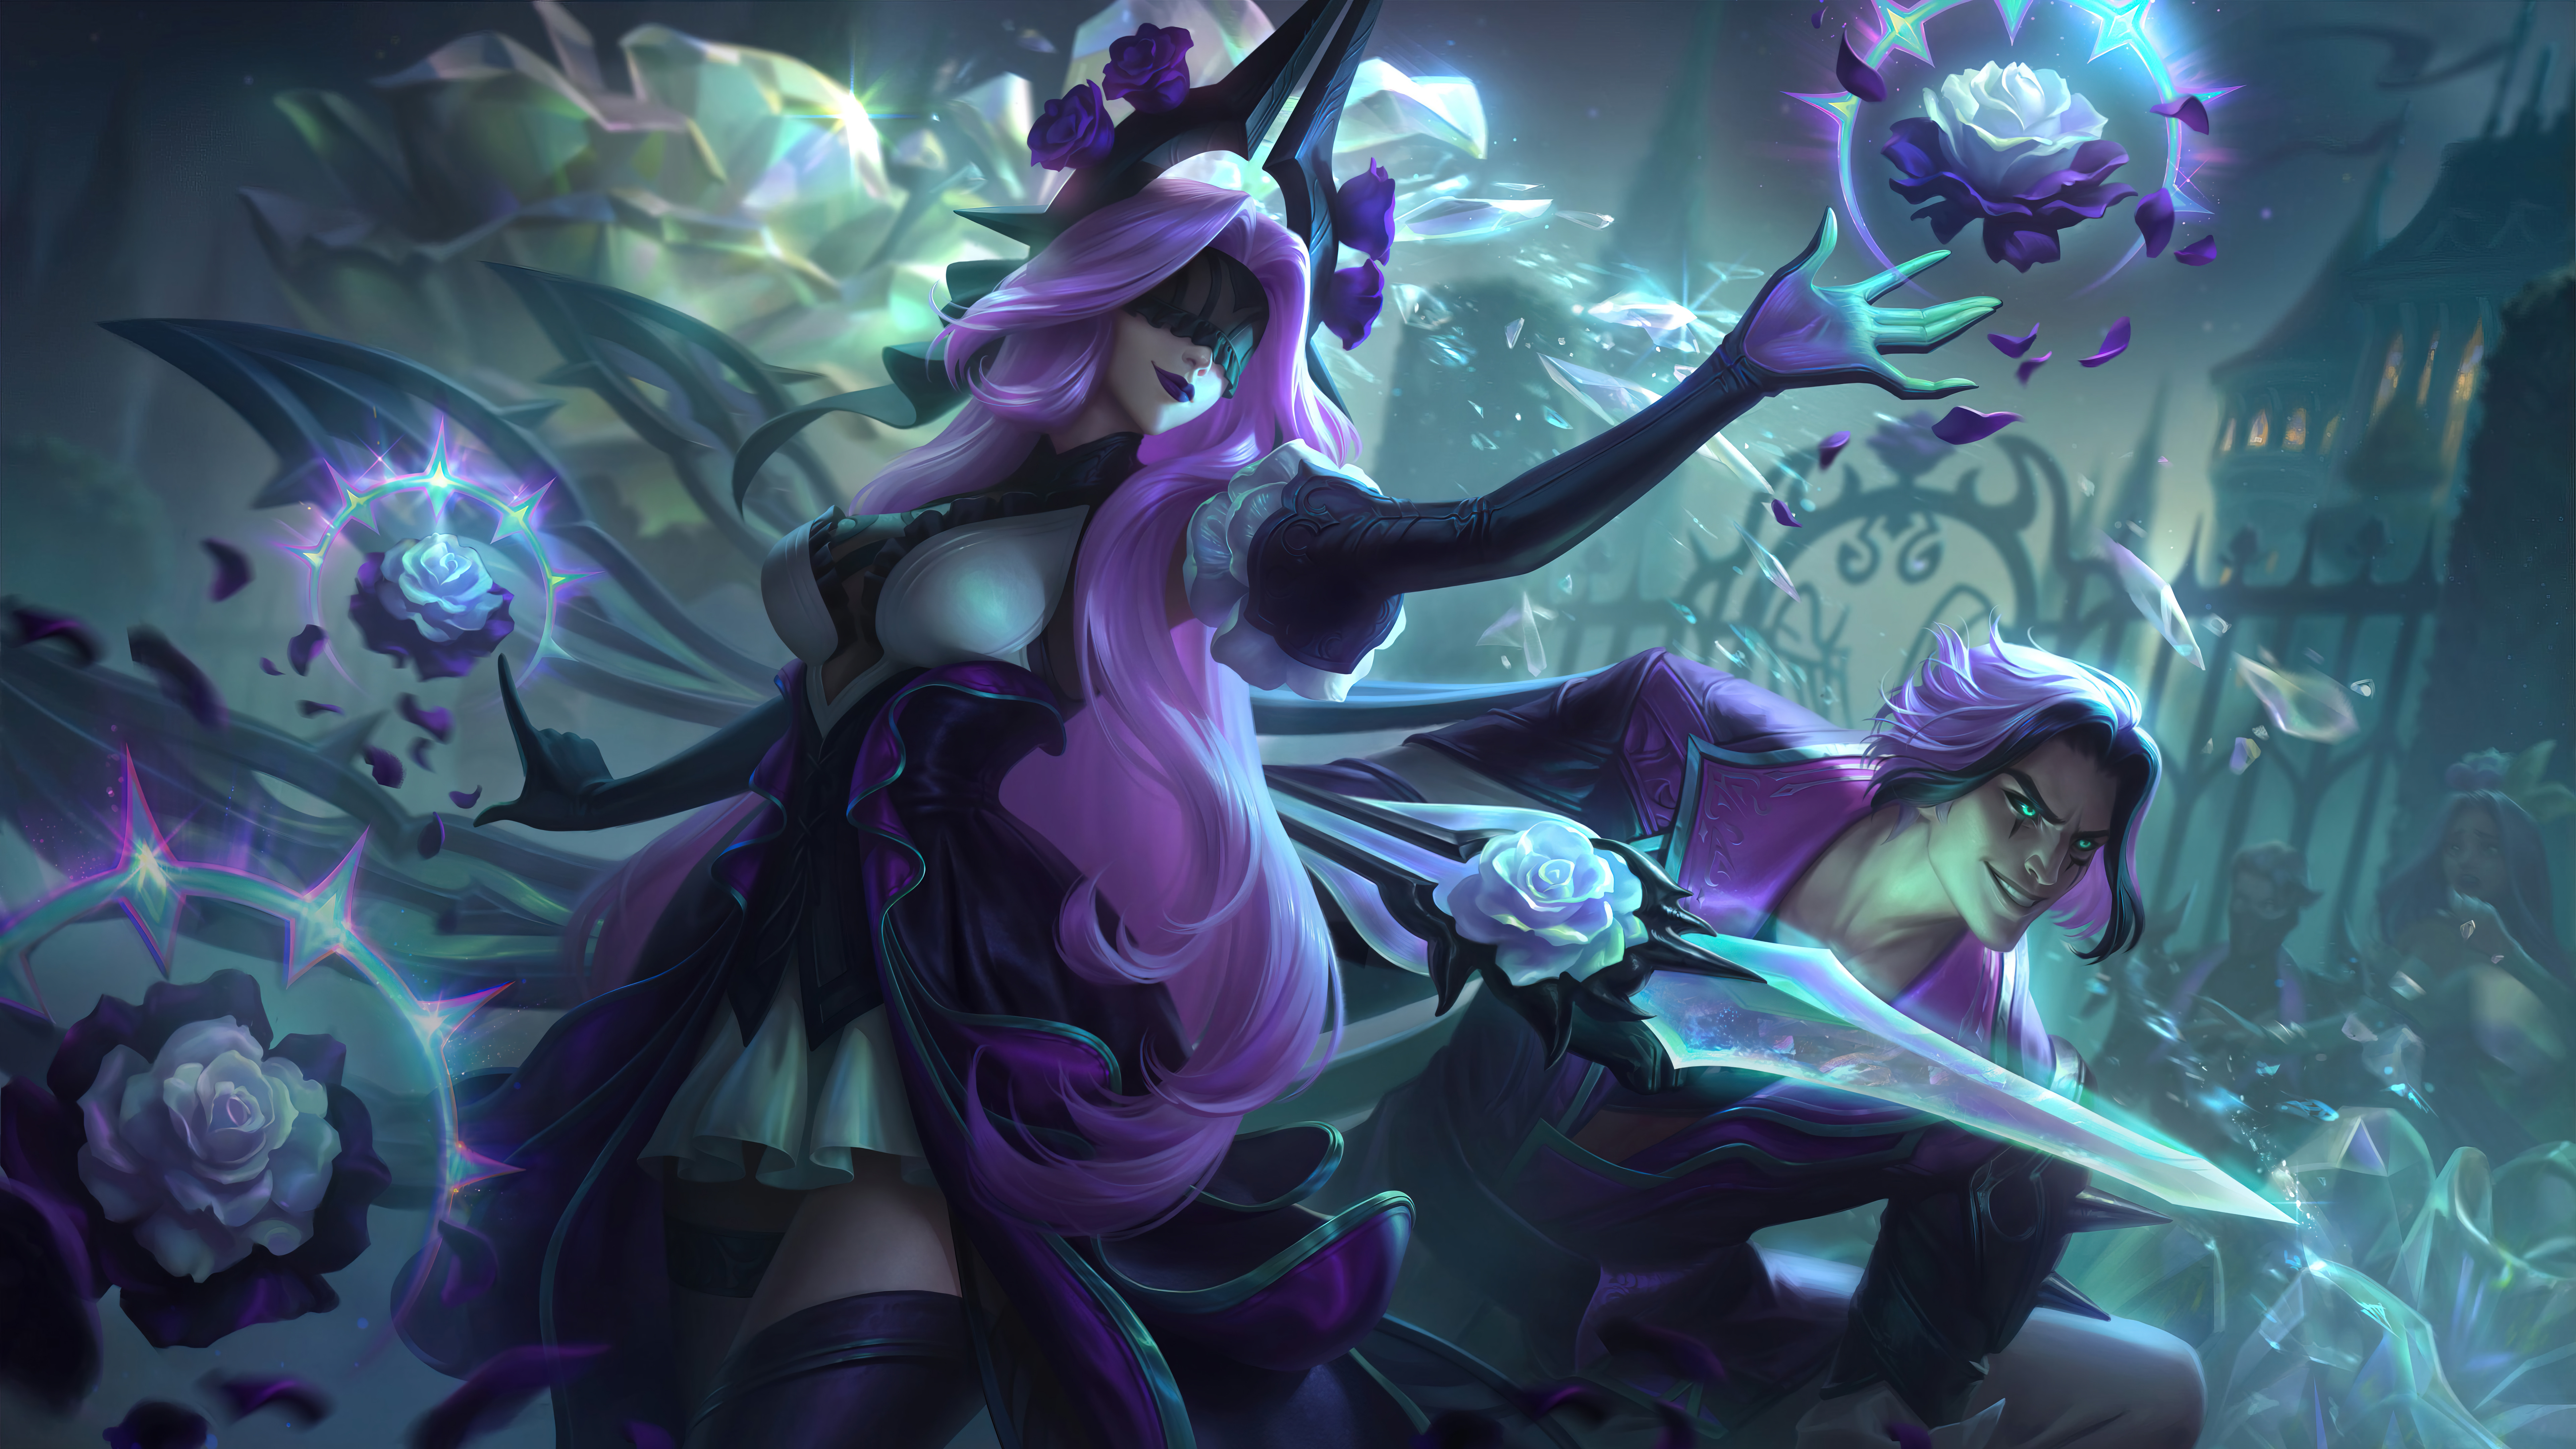 Withered Rose Rose League Of Legends Riot Games Talon League Of Legends Talon Syndra Syndra League O 7680x4320